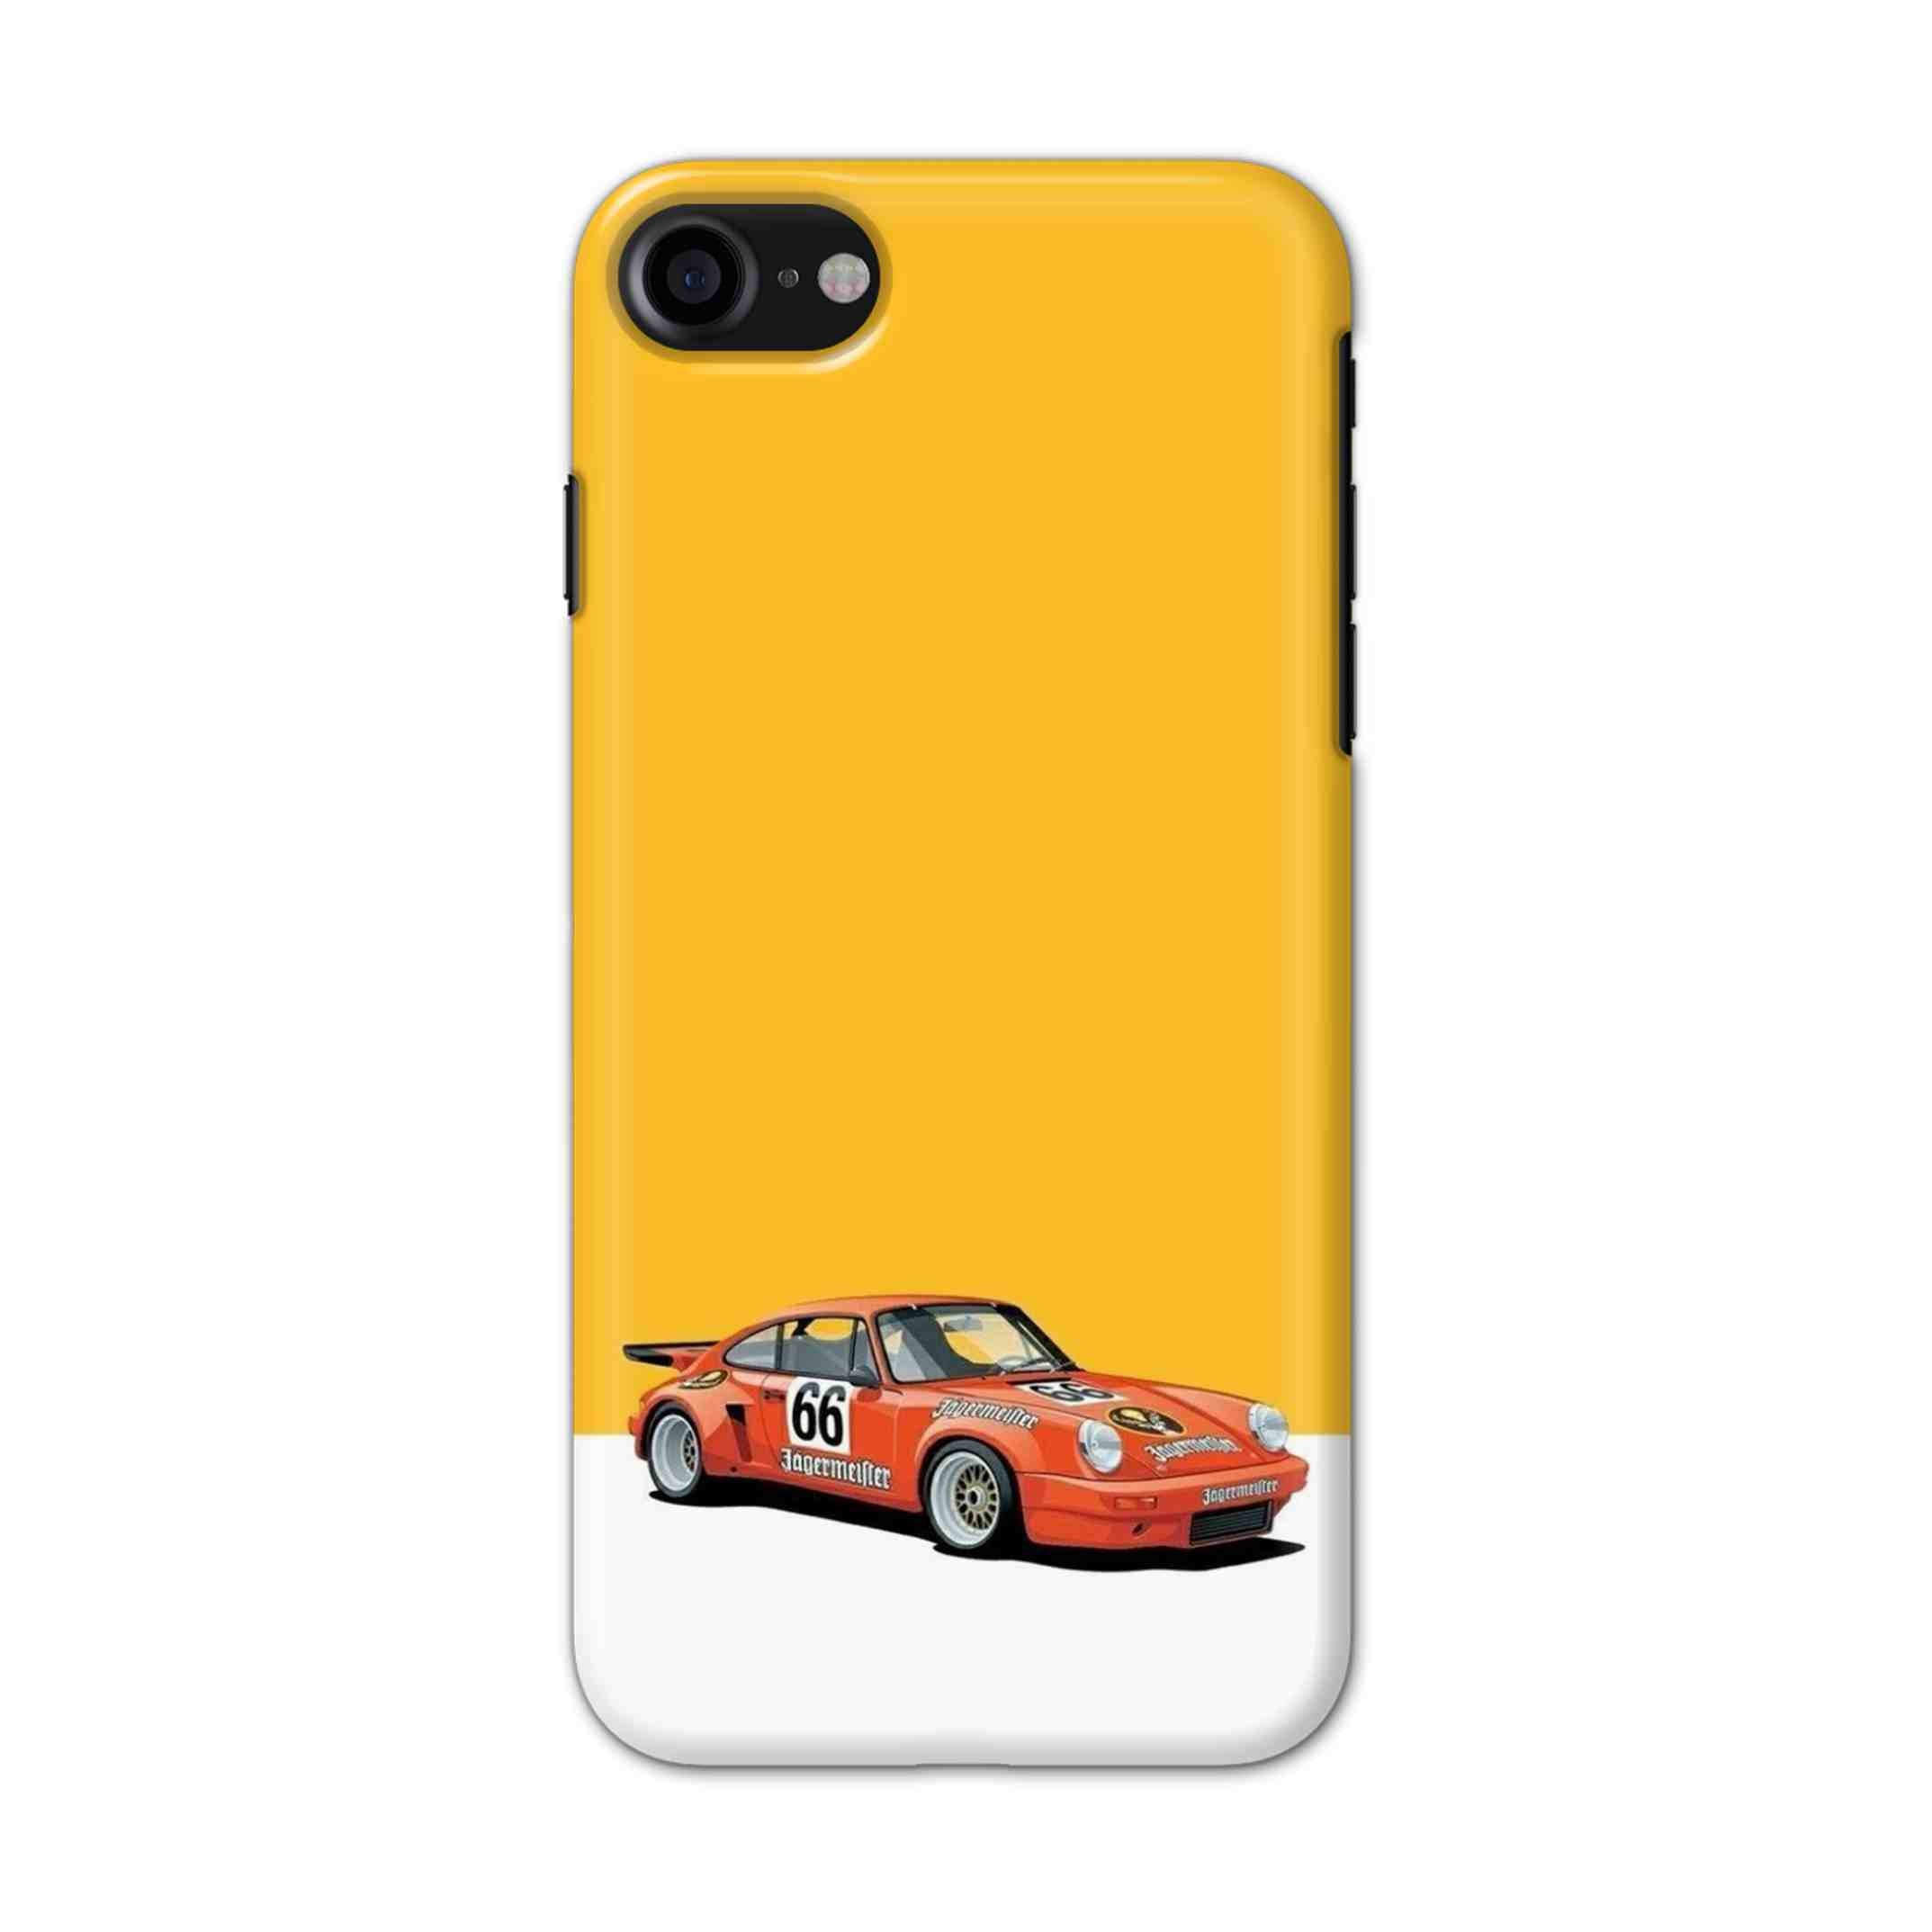 Buy Porche Hard Back Mobile Phone Case/Cover For iPhone 7 / 8 Online